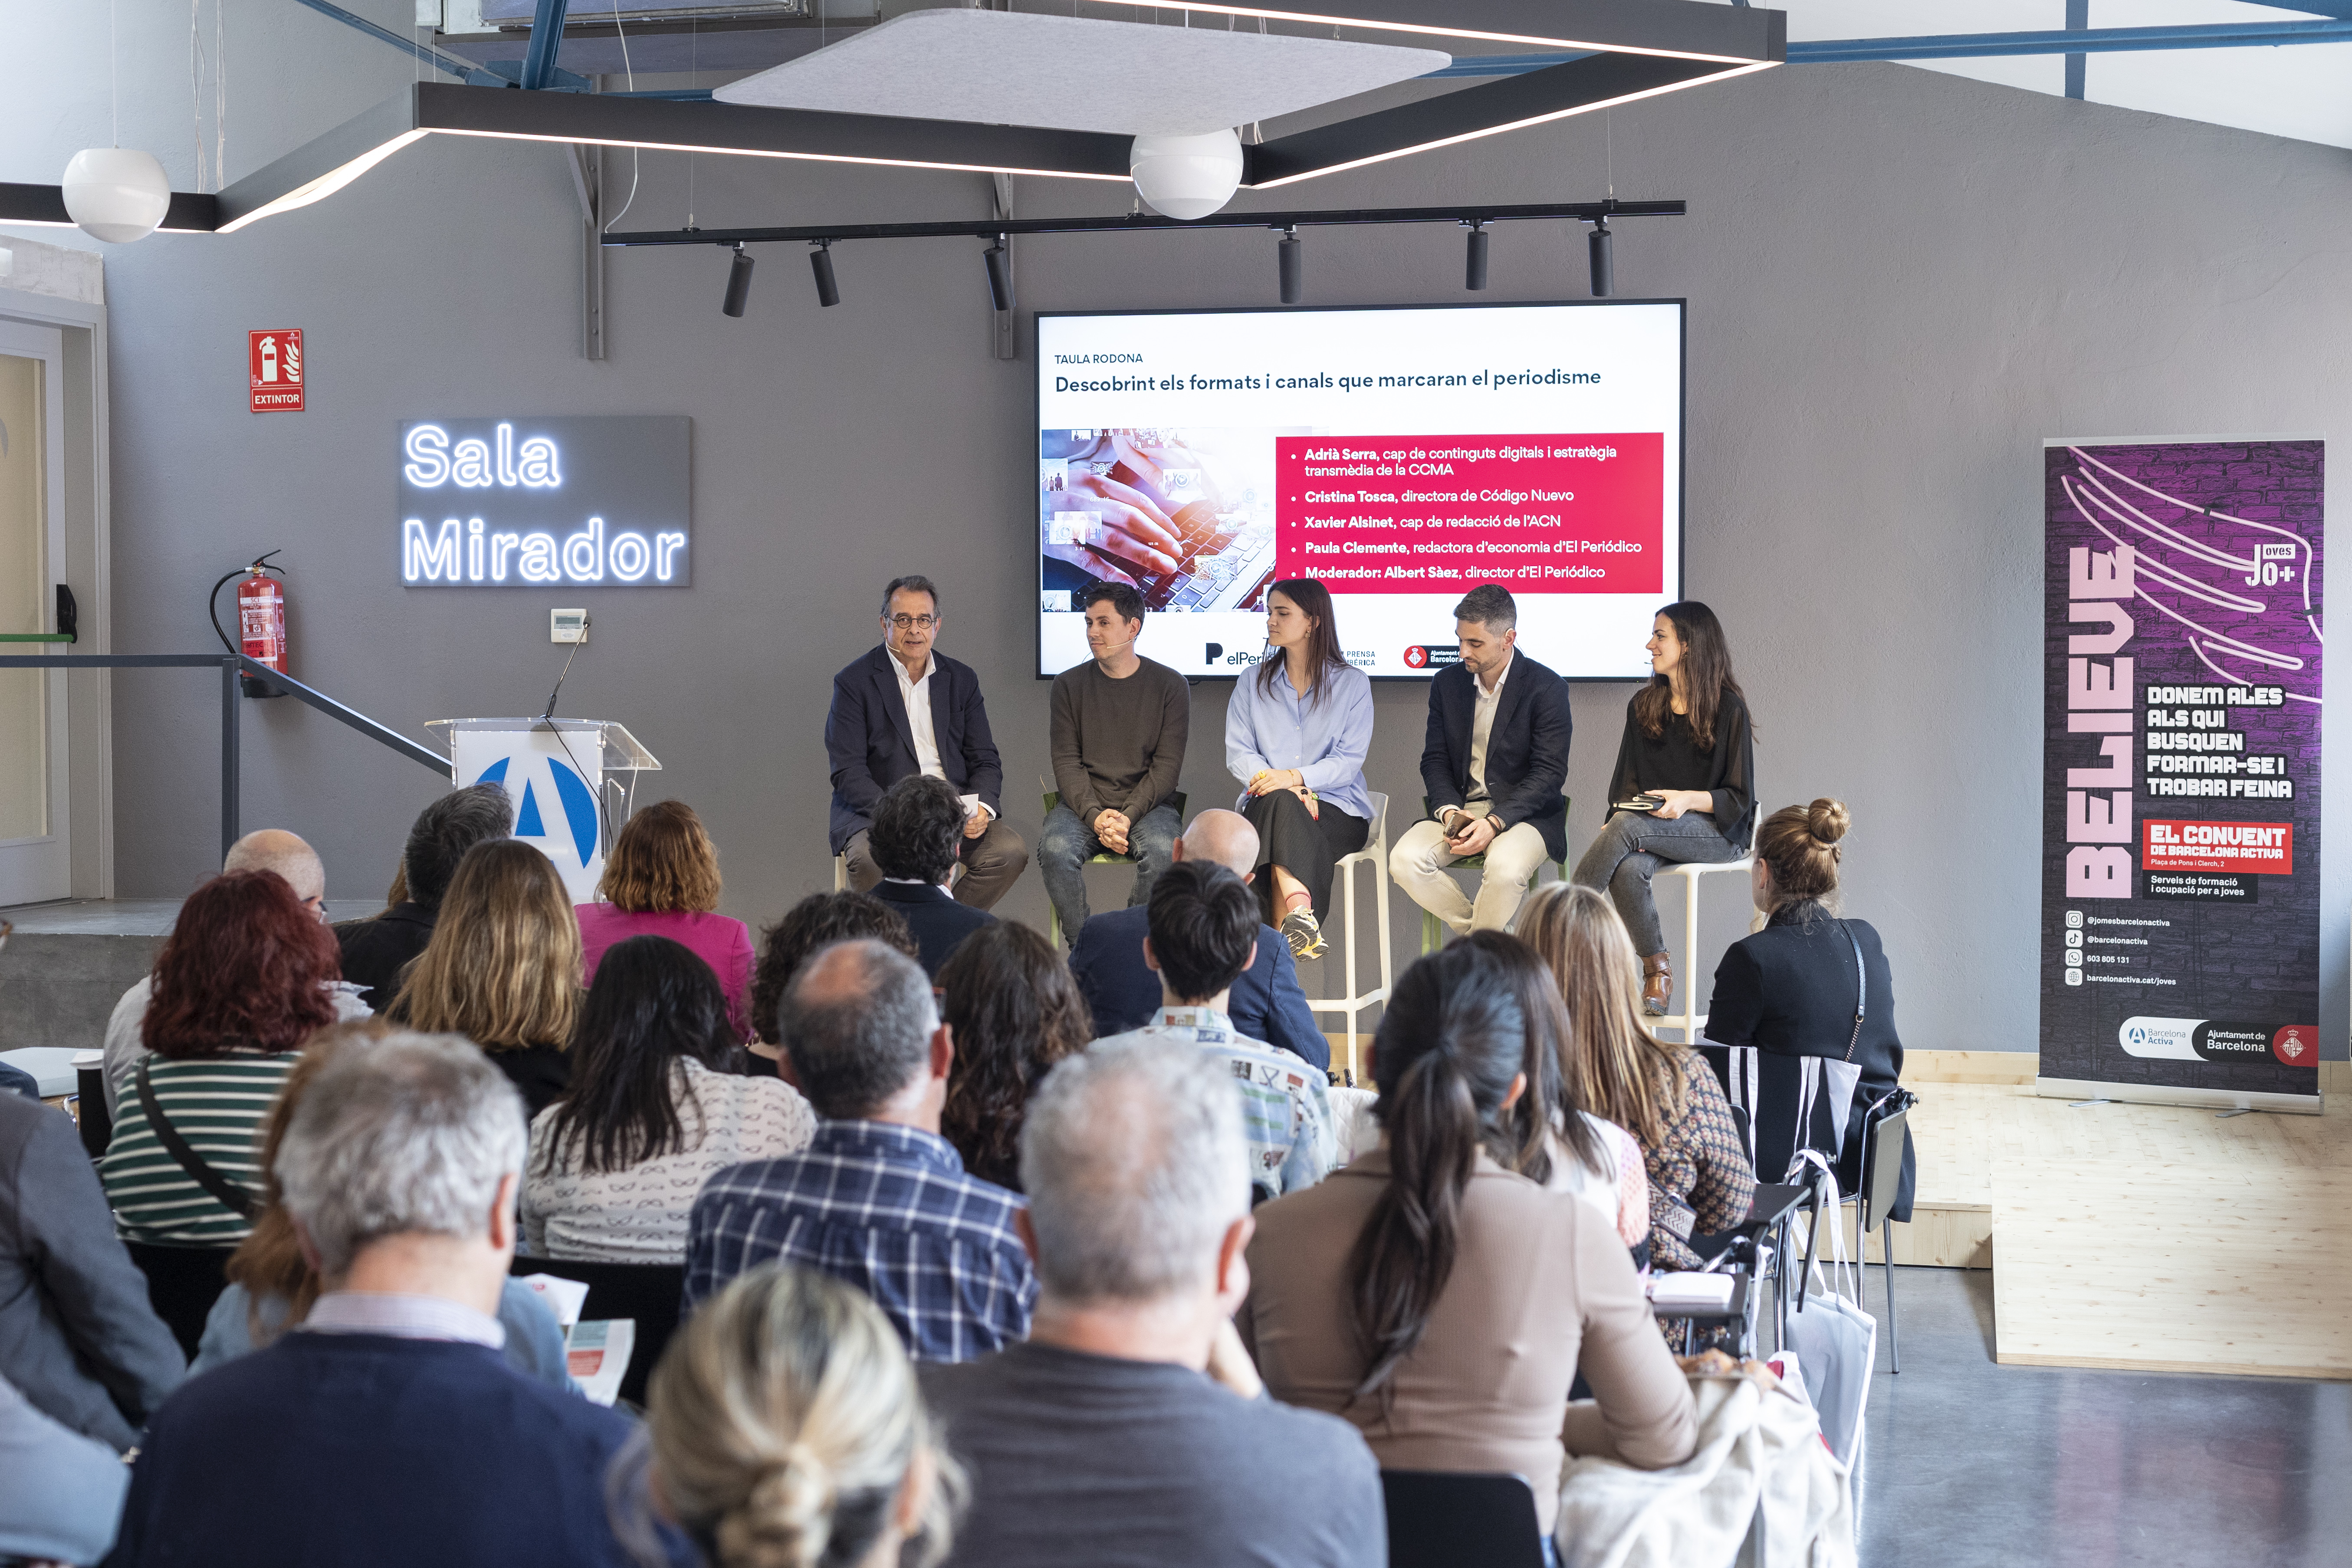 Barcelona Activa’s youth space hosts a conference on formats and channels that will shape the future of journalism with industry professionals